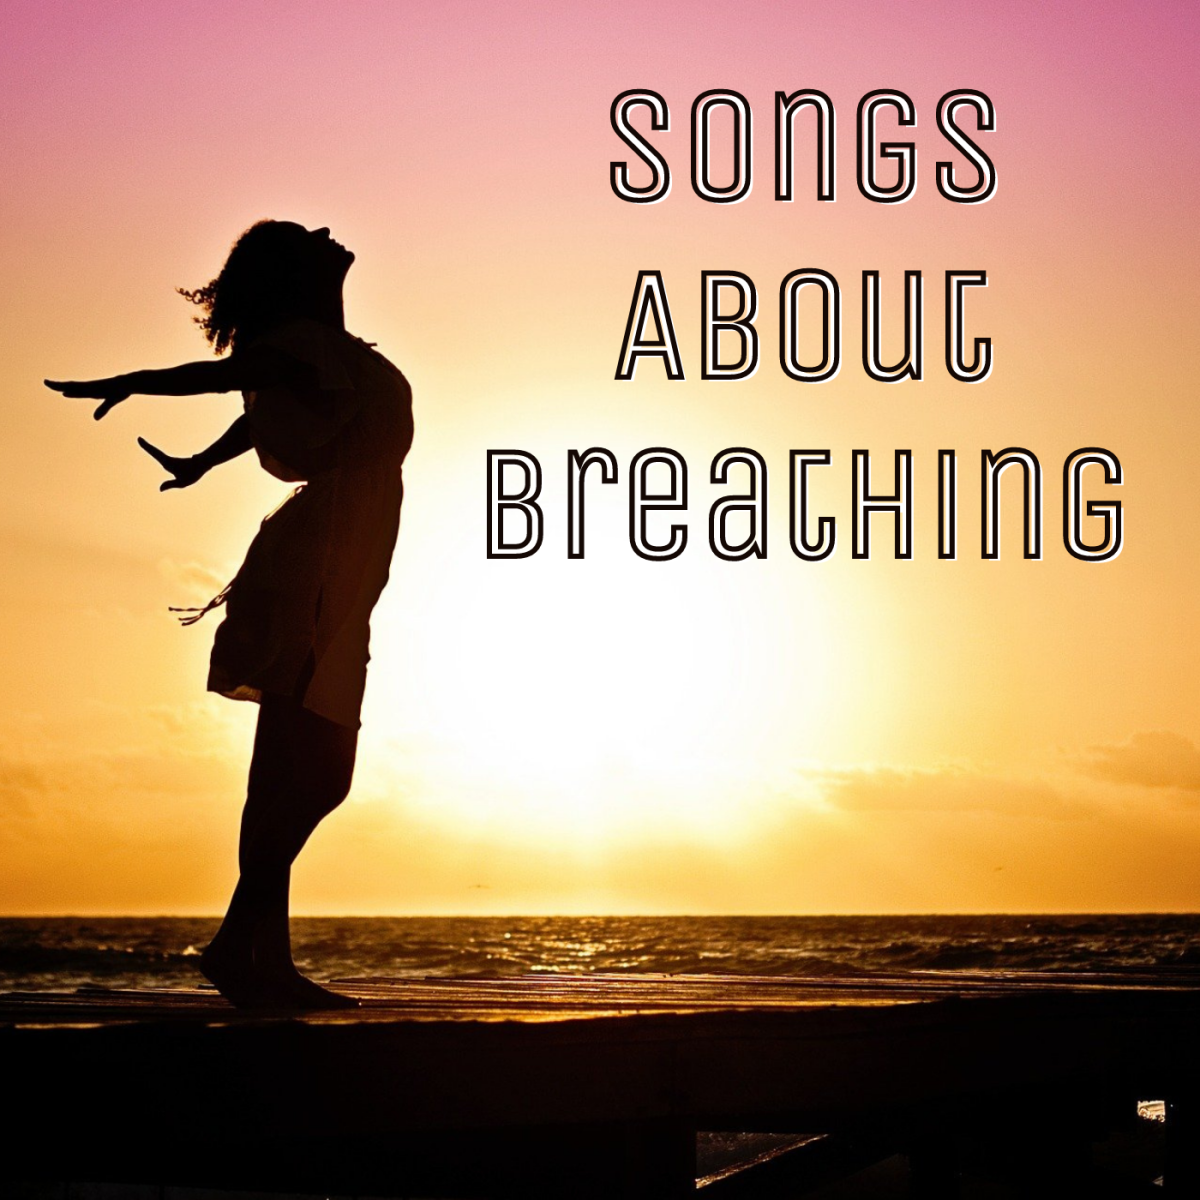 53 Songs About Breathing